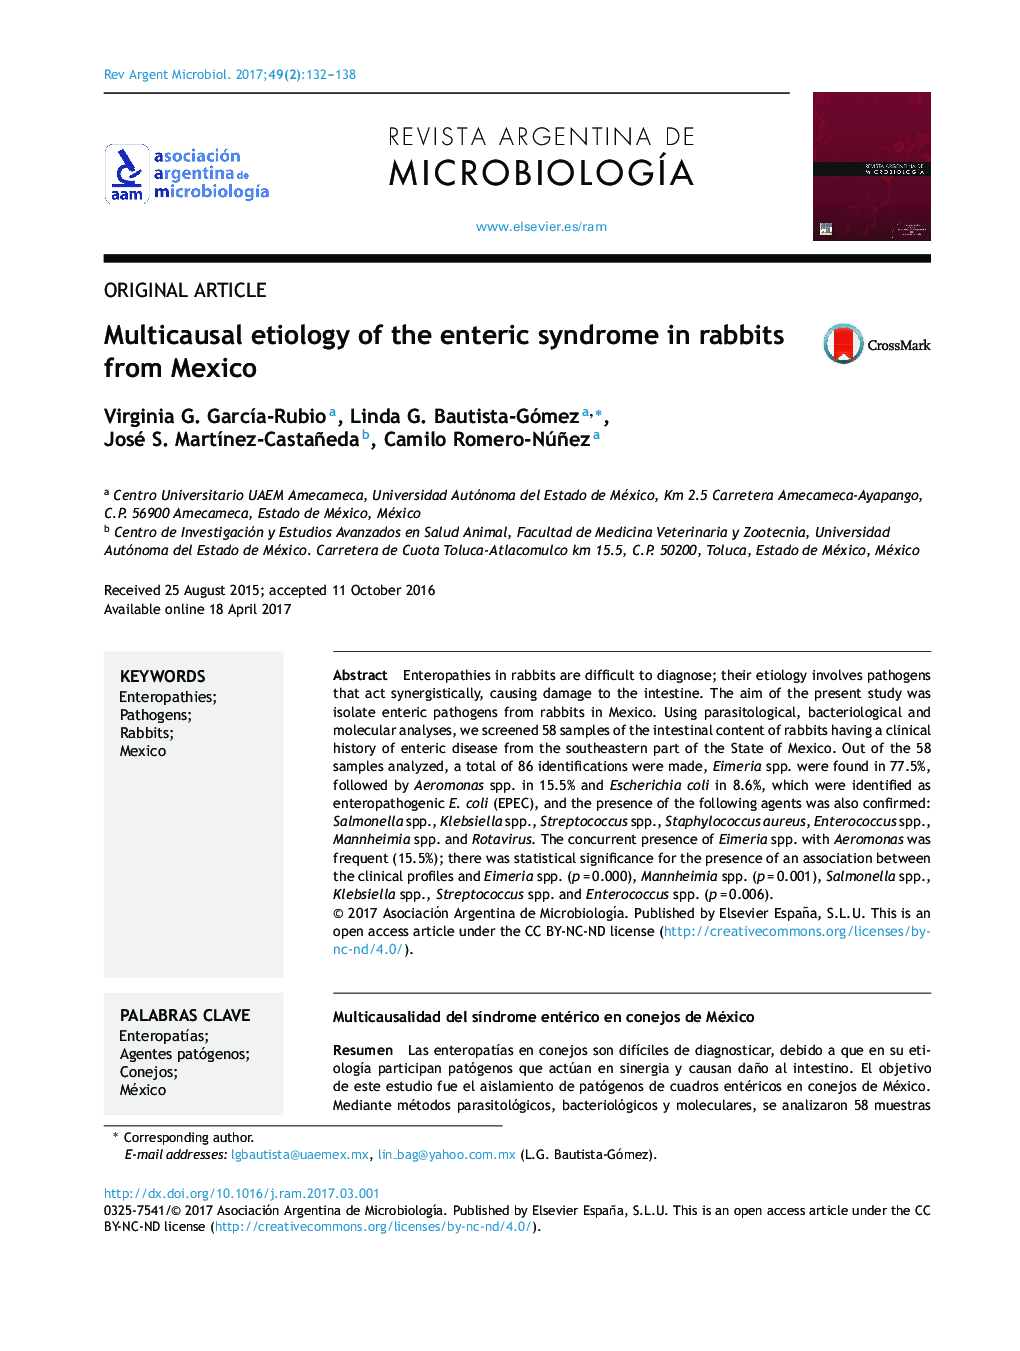 Multicausal etiology of the enteric syndrome in rabbits from Mexico